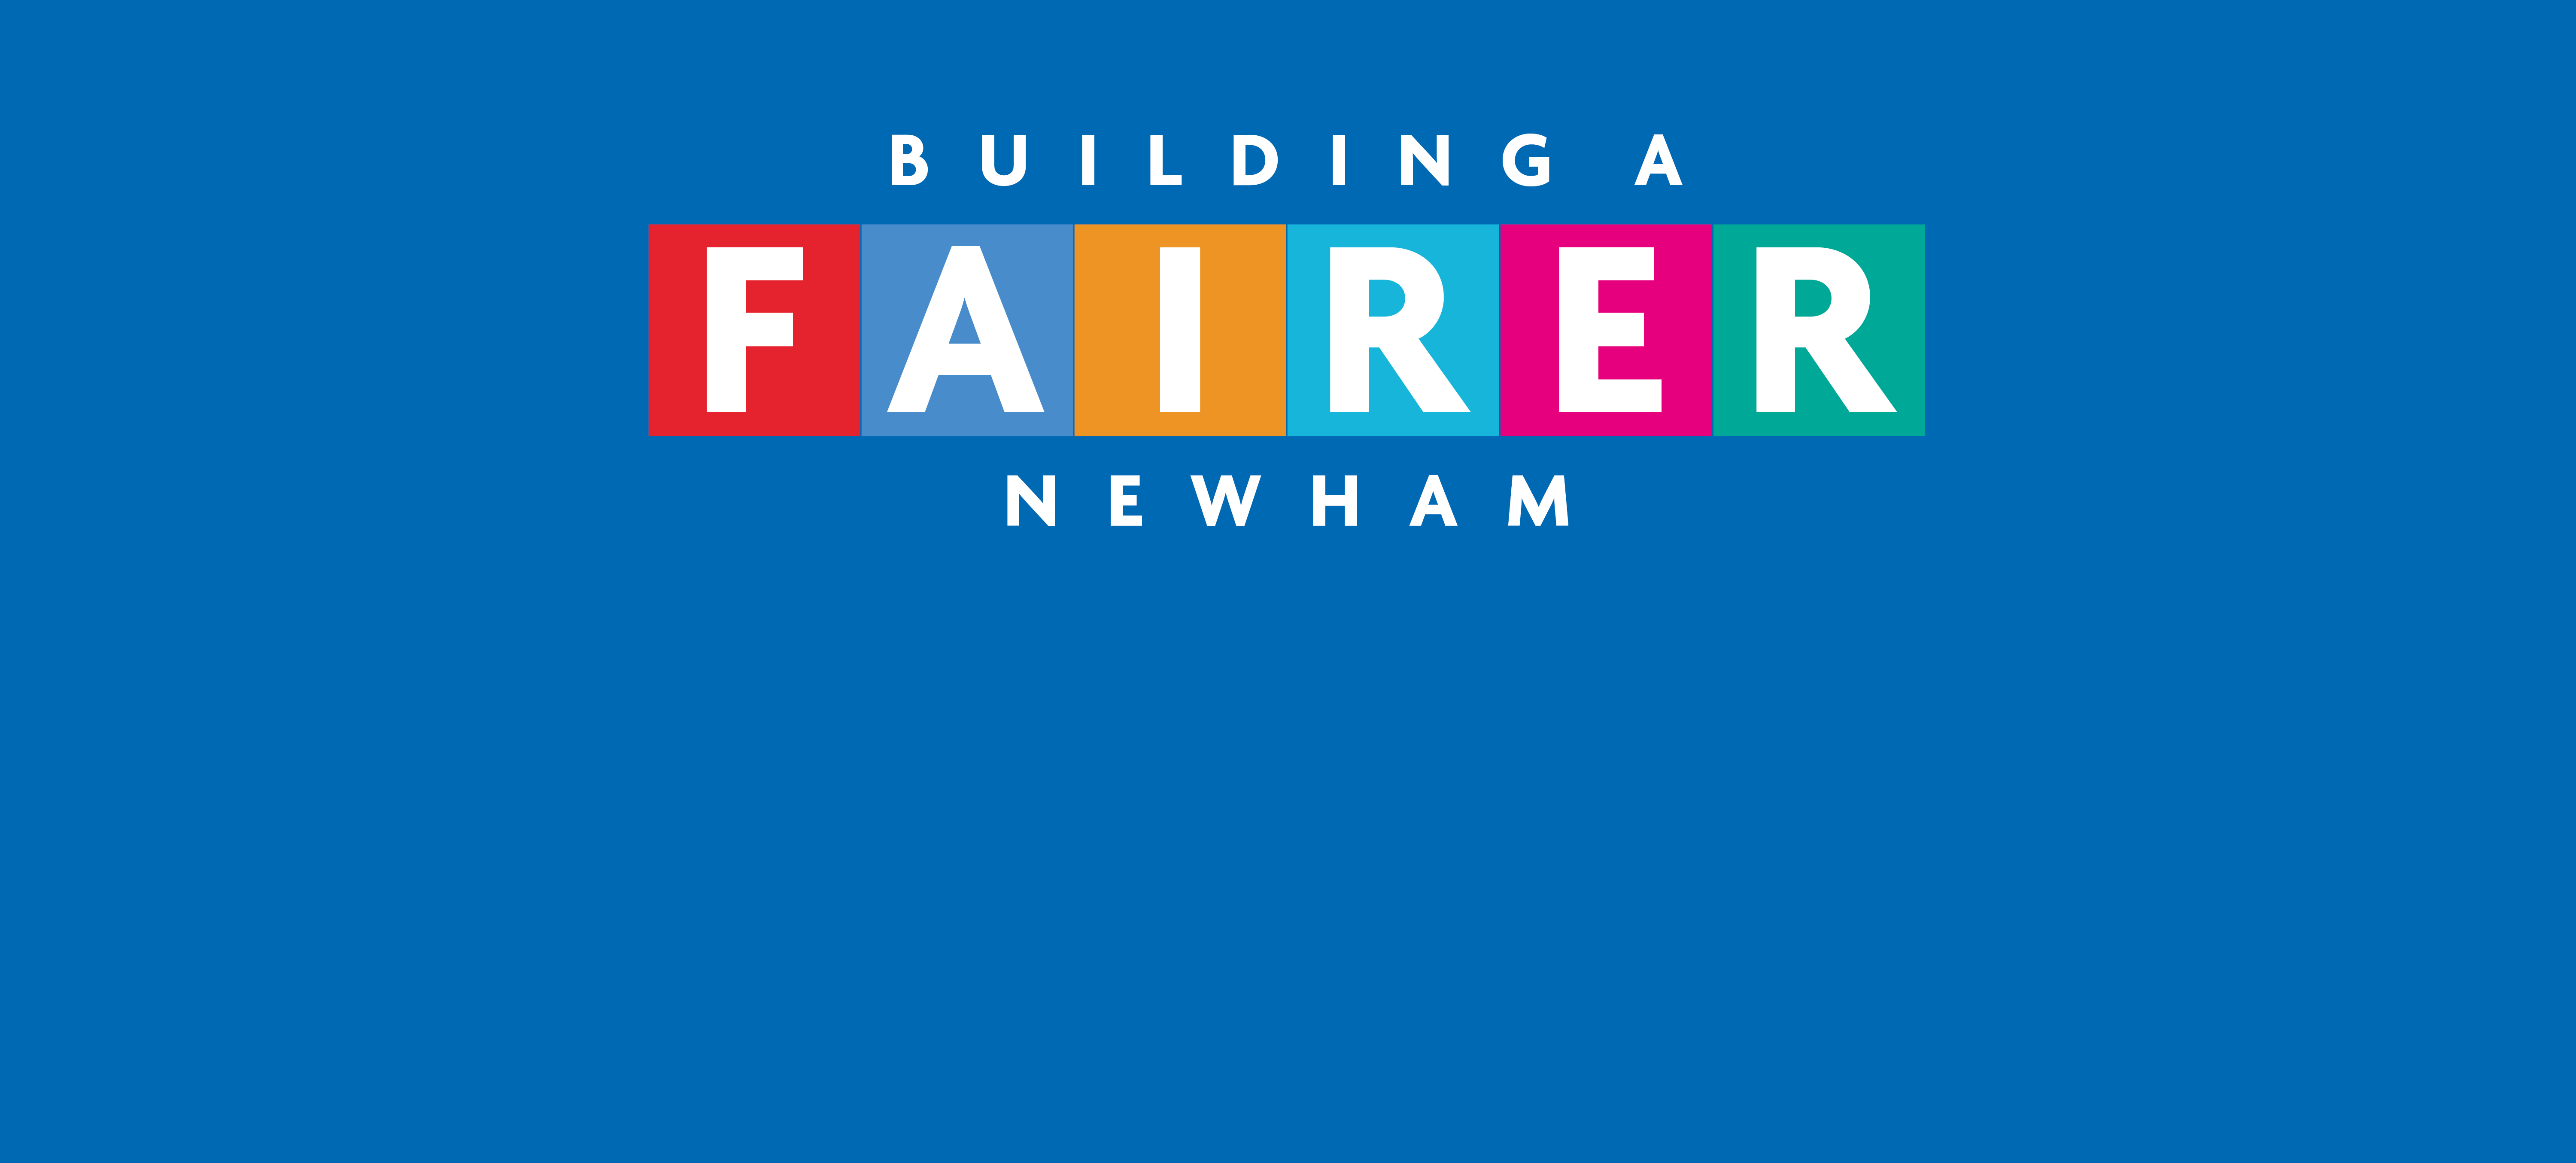 Building A Fairer Newham, newham, homepage banner